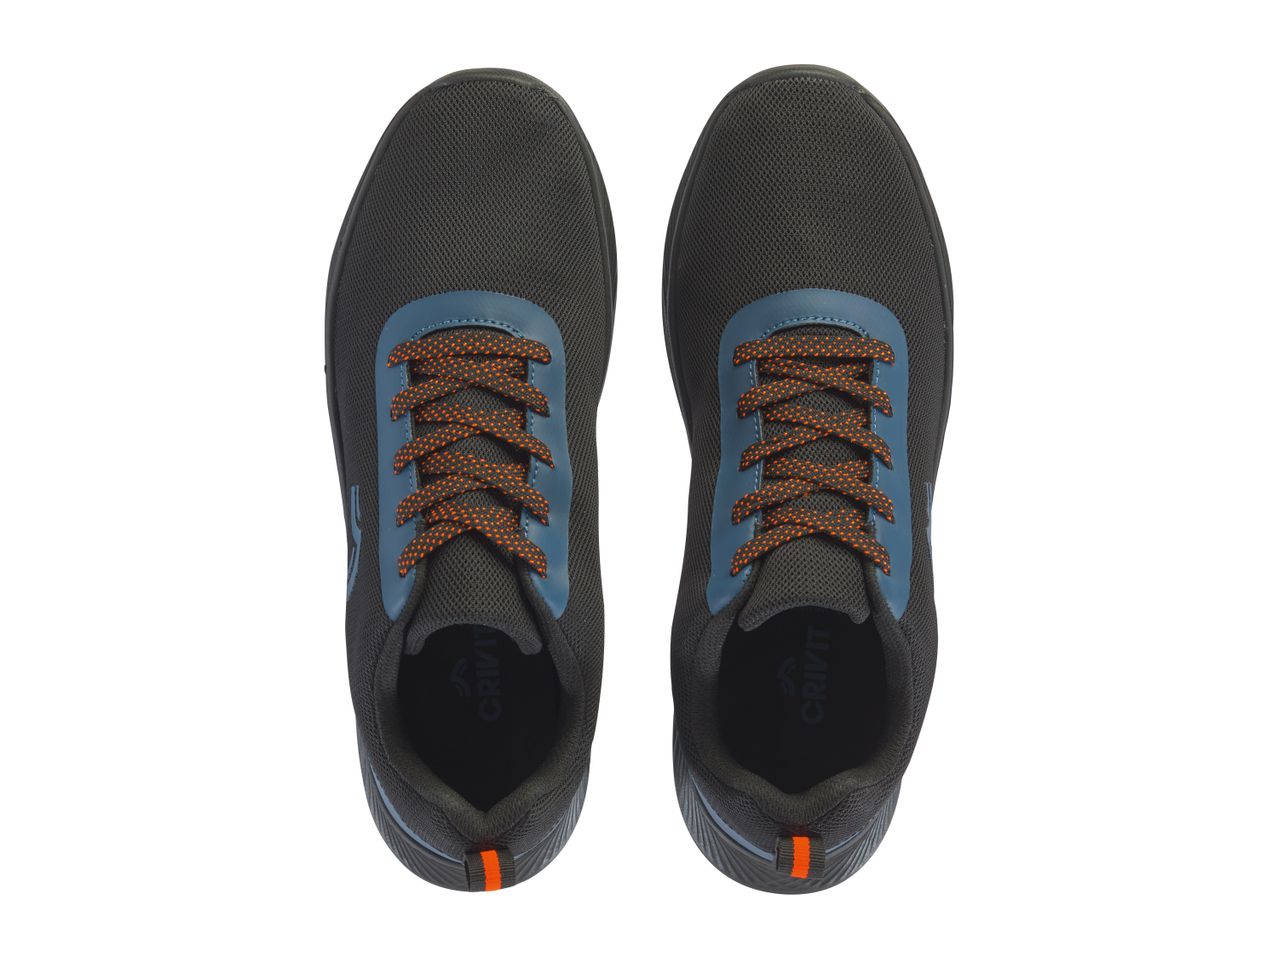 Go to full screen view: Crivit Men’s Trainers - Image 13